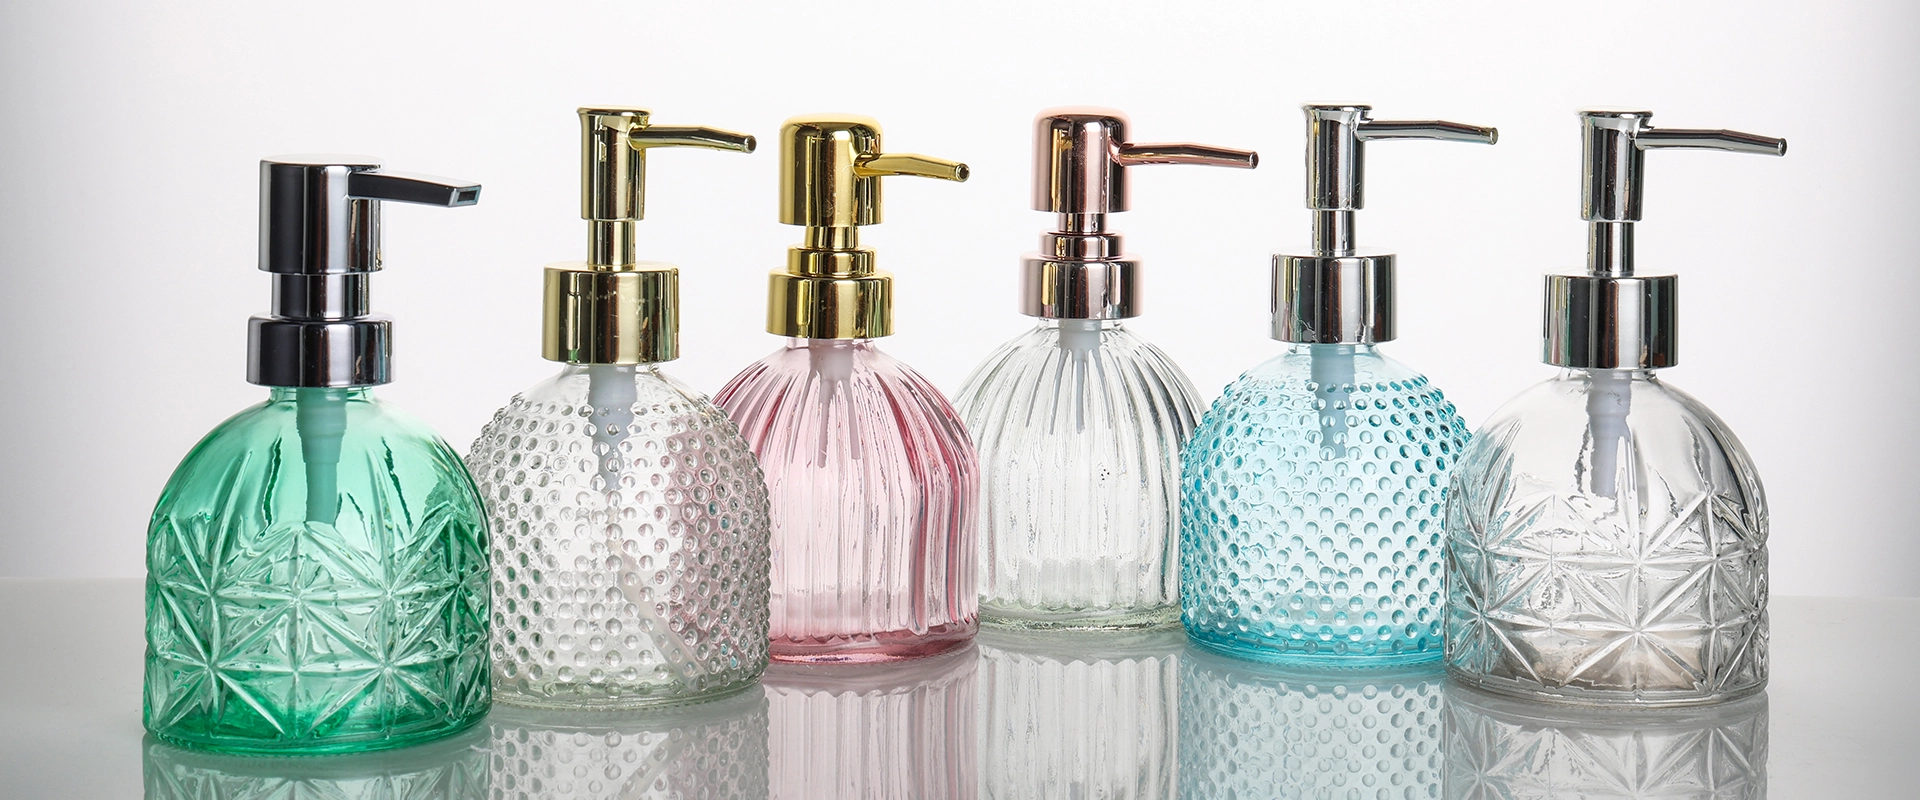 What Types Of Glass Bottles Are Commonly Used For Fragrances?